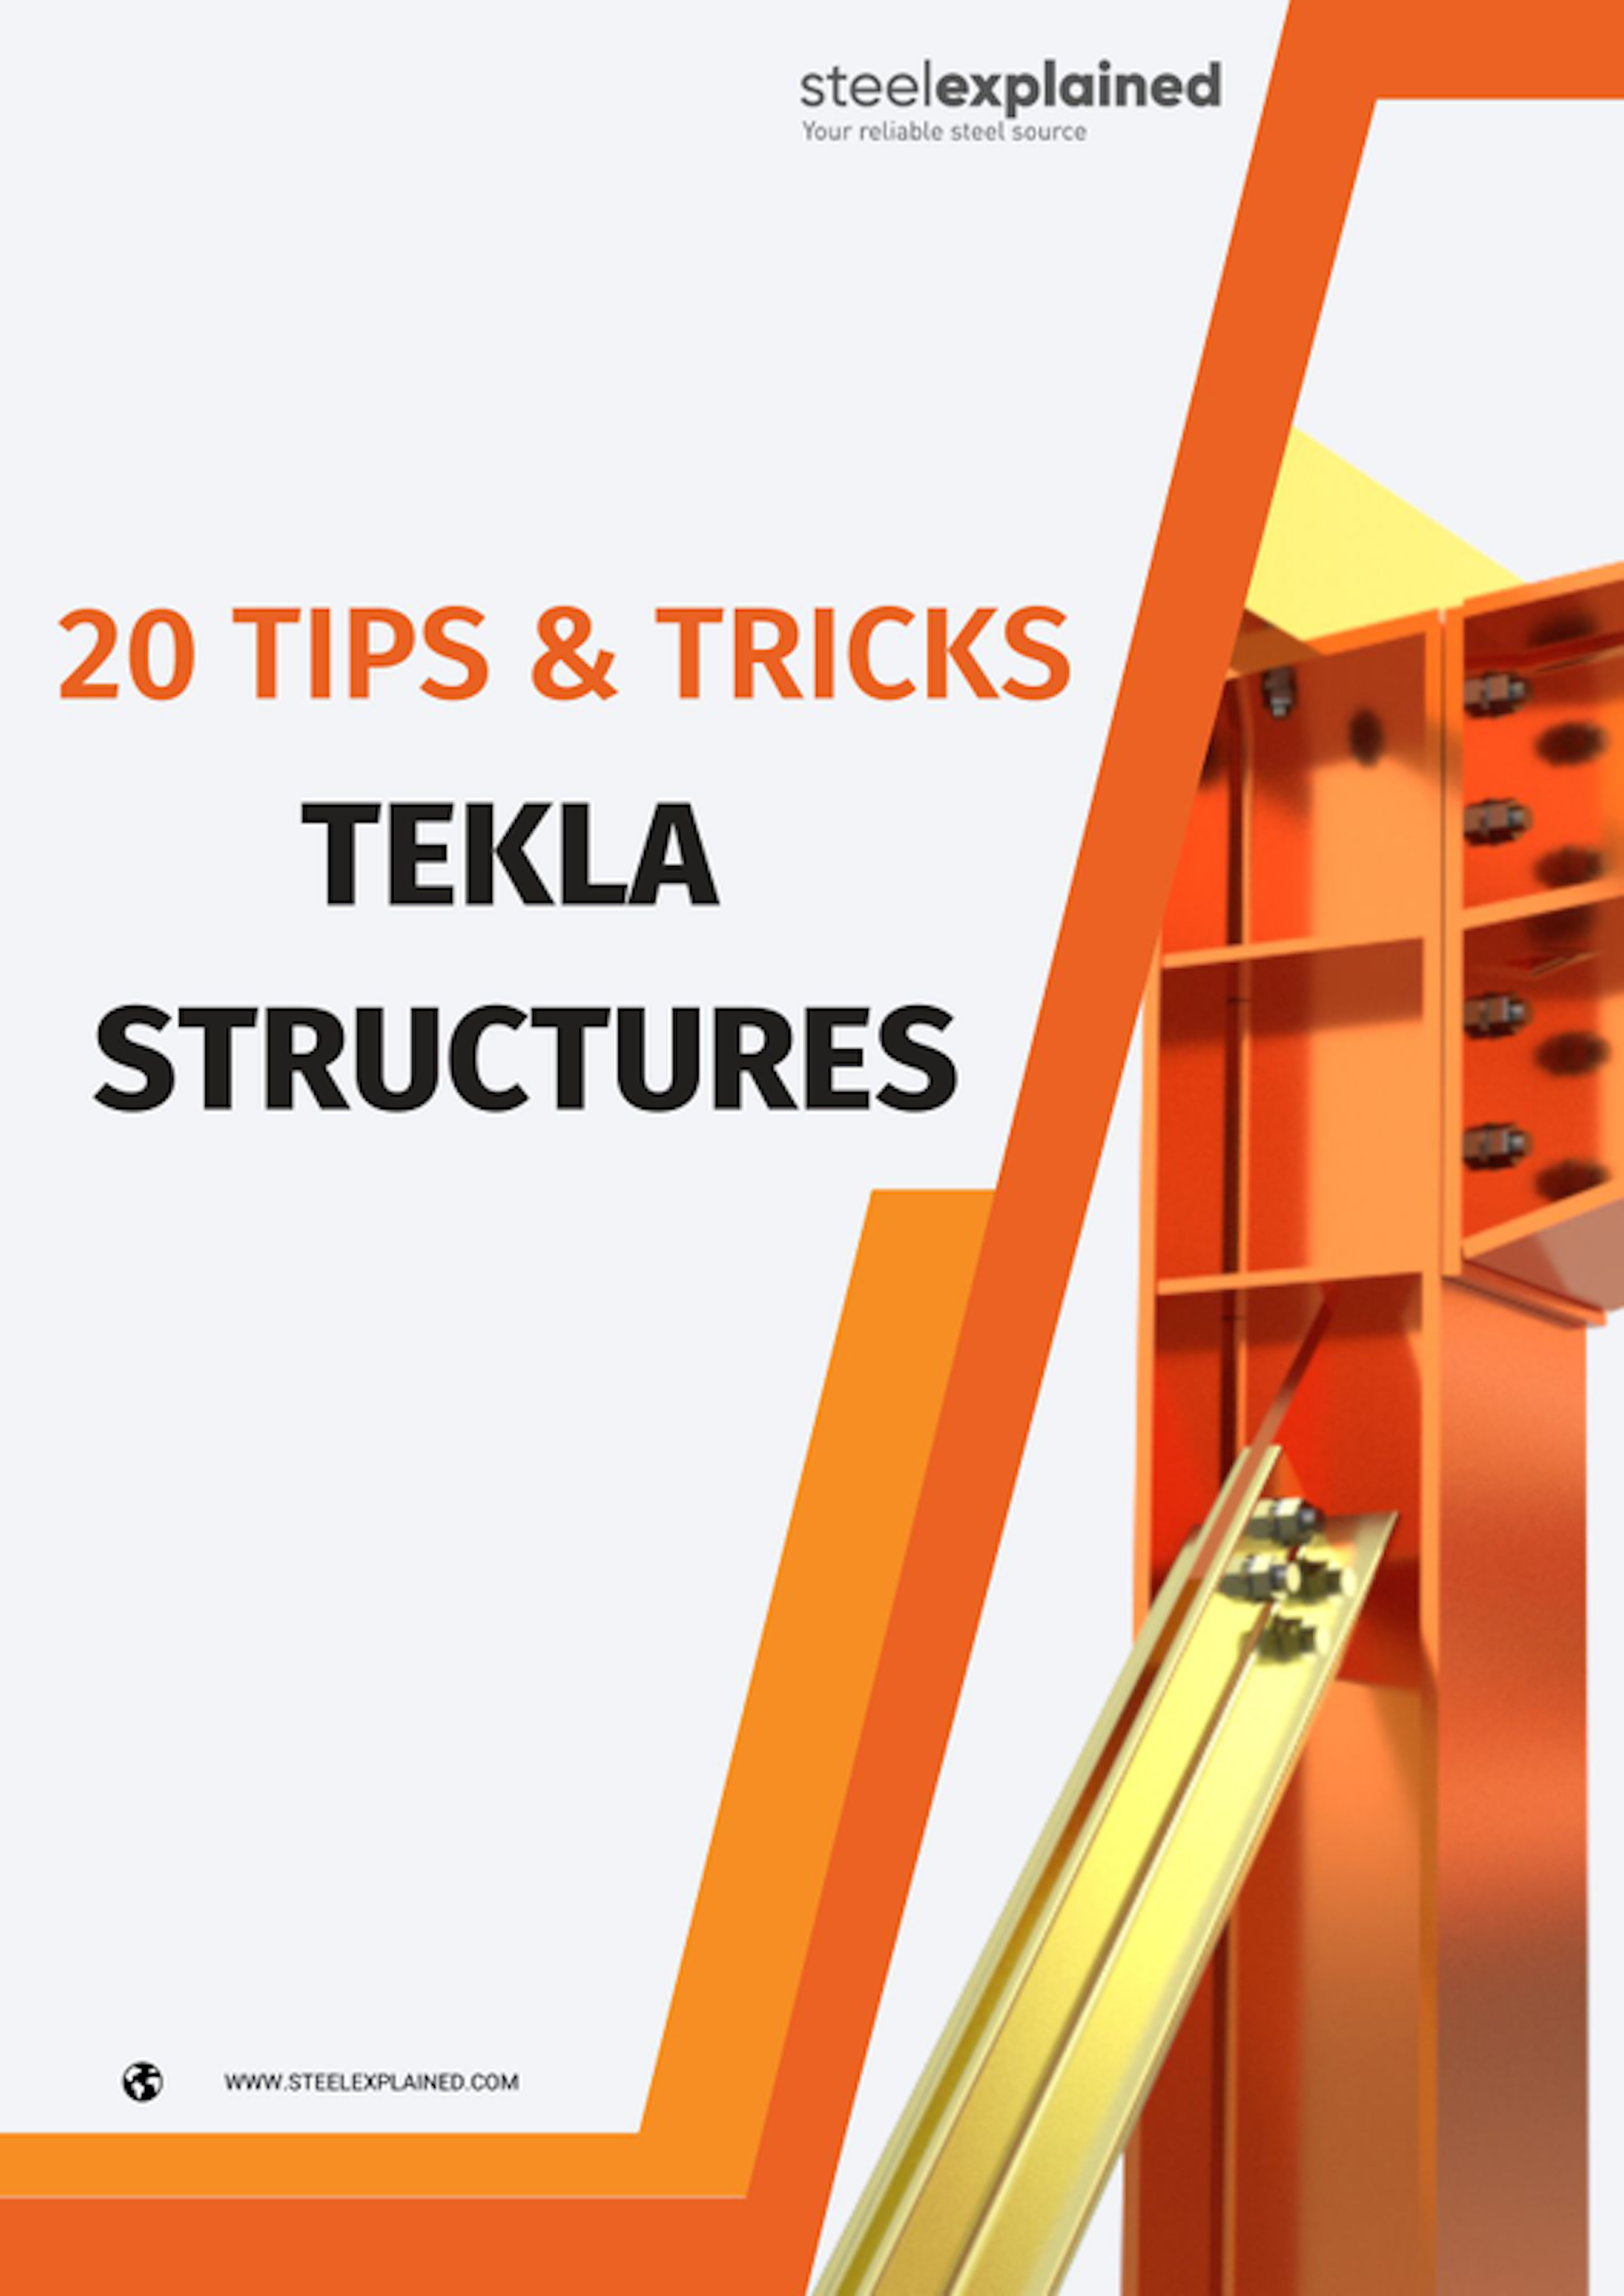 Tekla Structures - 20 Quick Tips